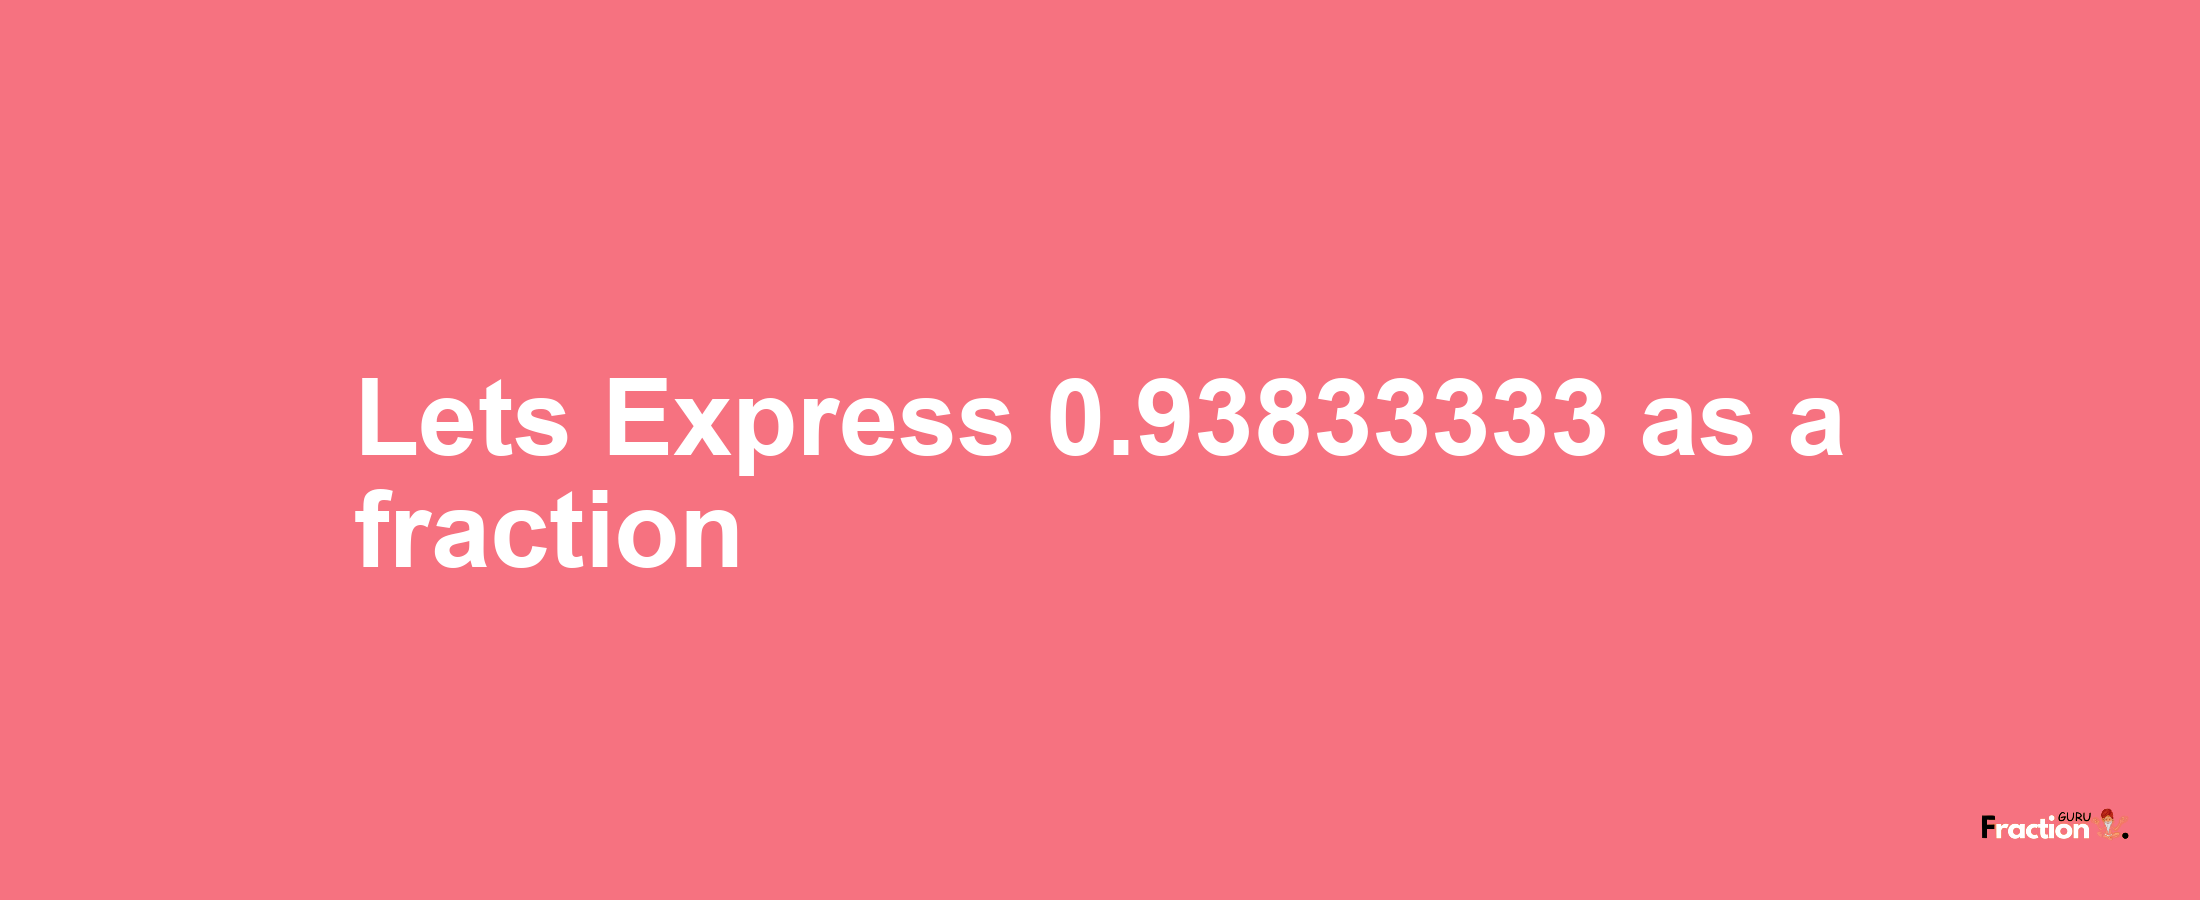 Lets Express 0.93833333 as afraction